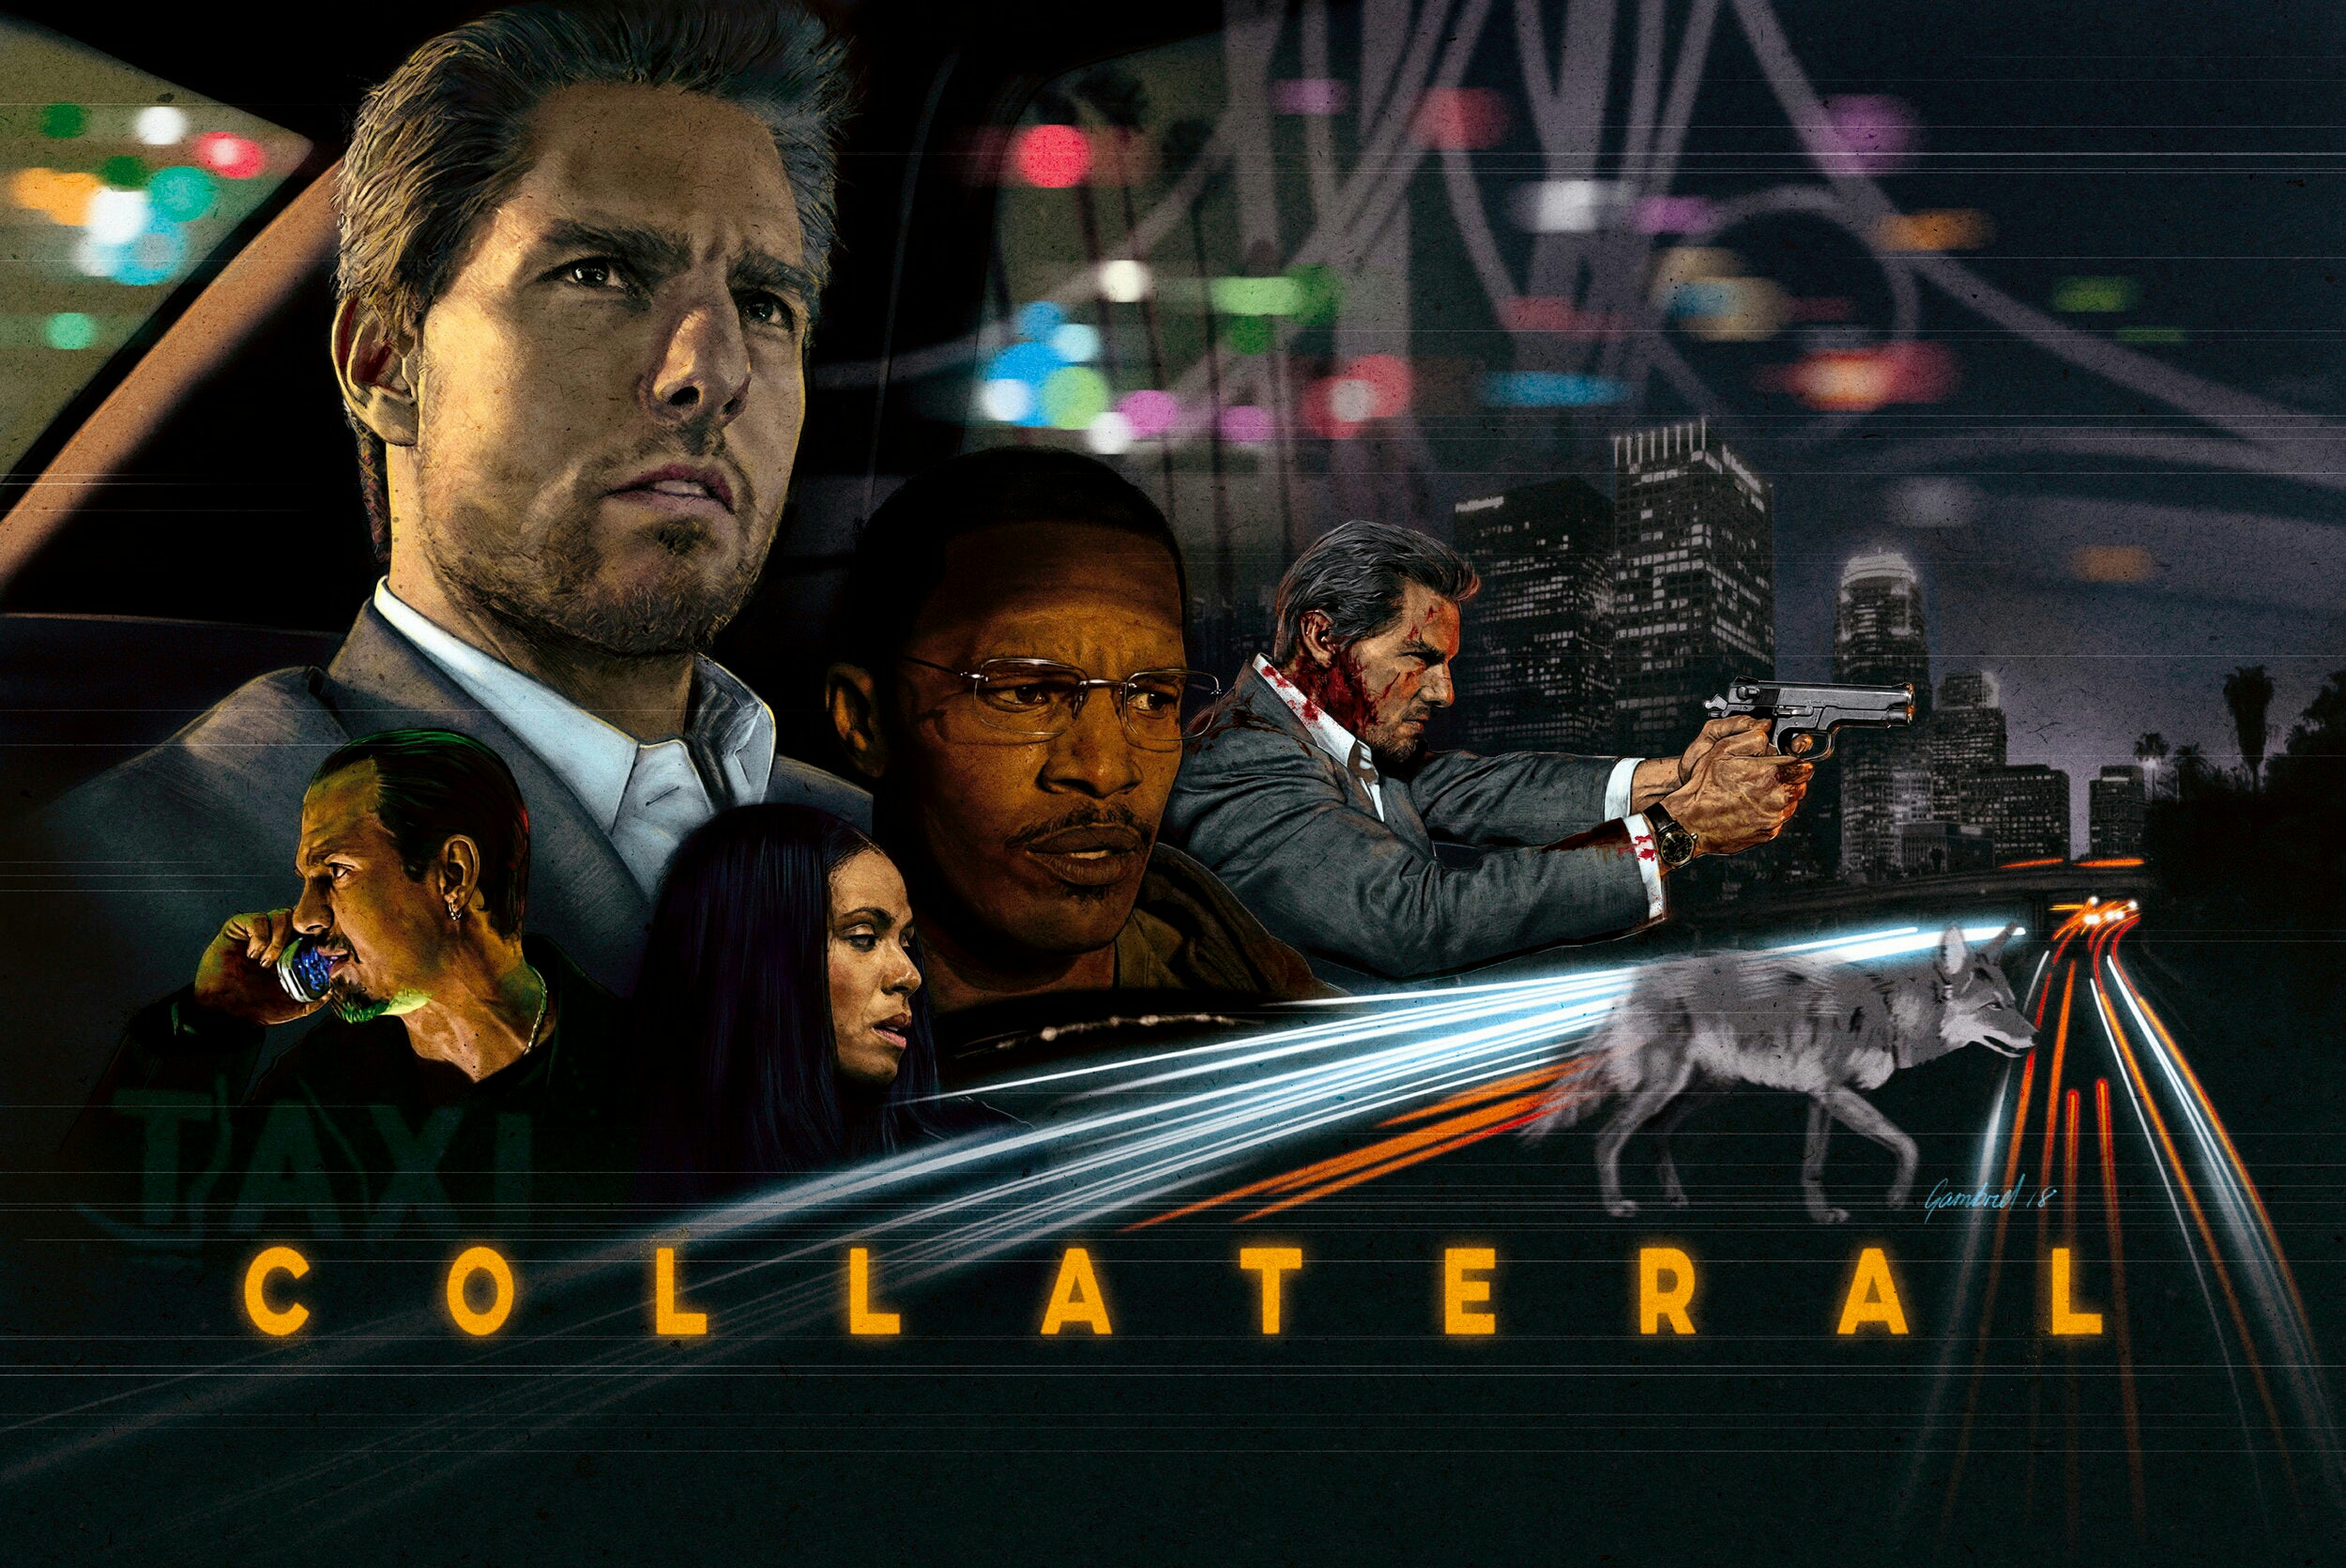 Movie Collateral HD Wallpaper | Background Image